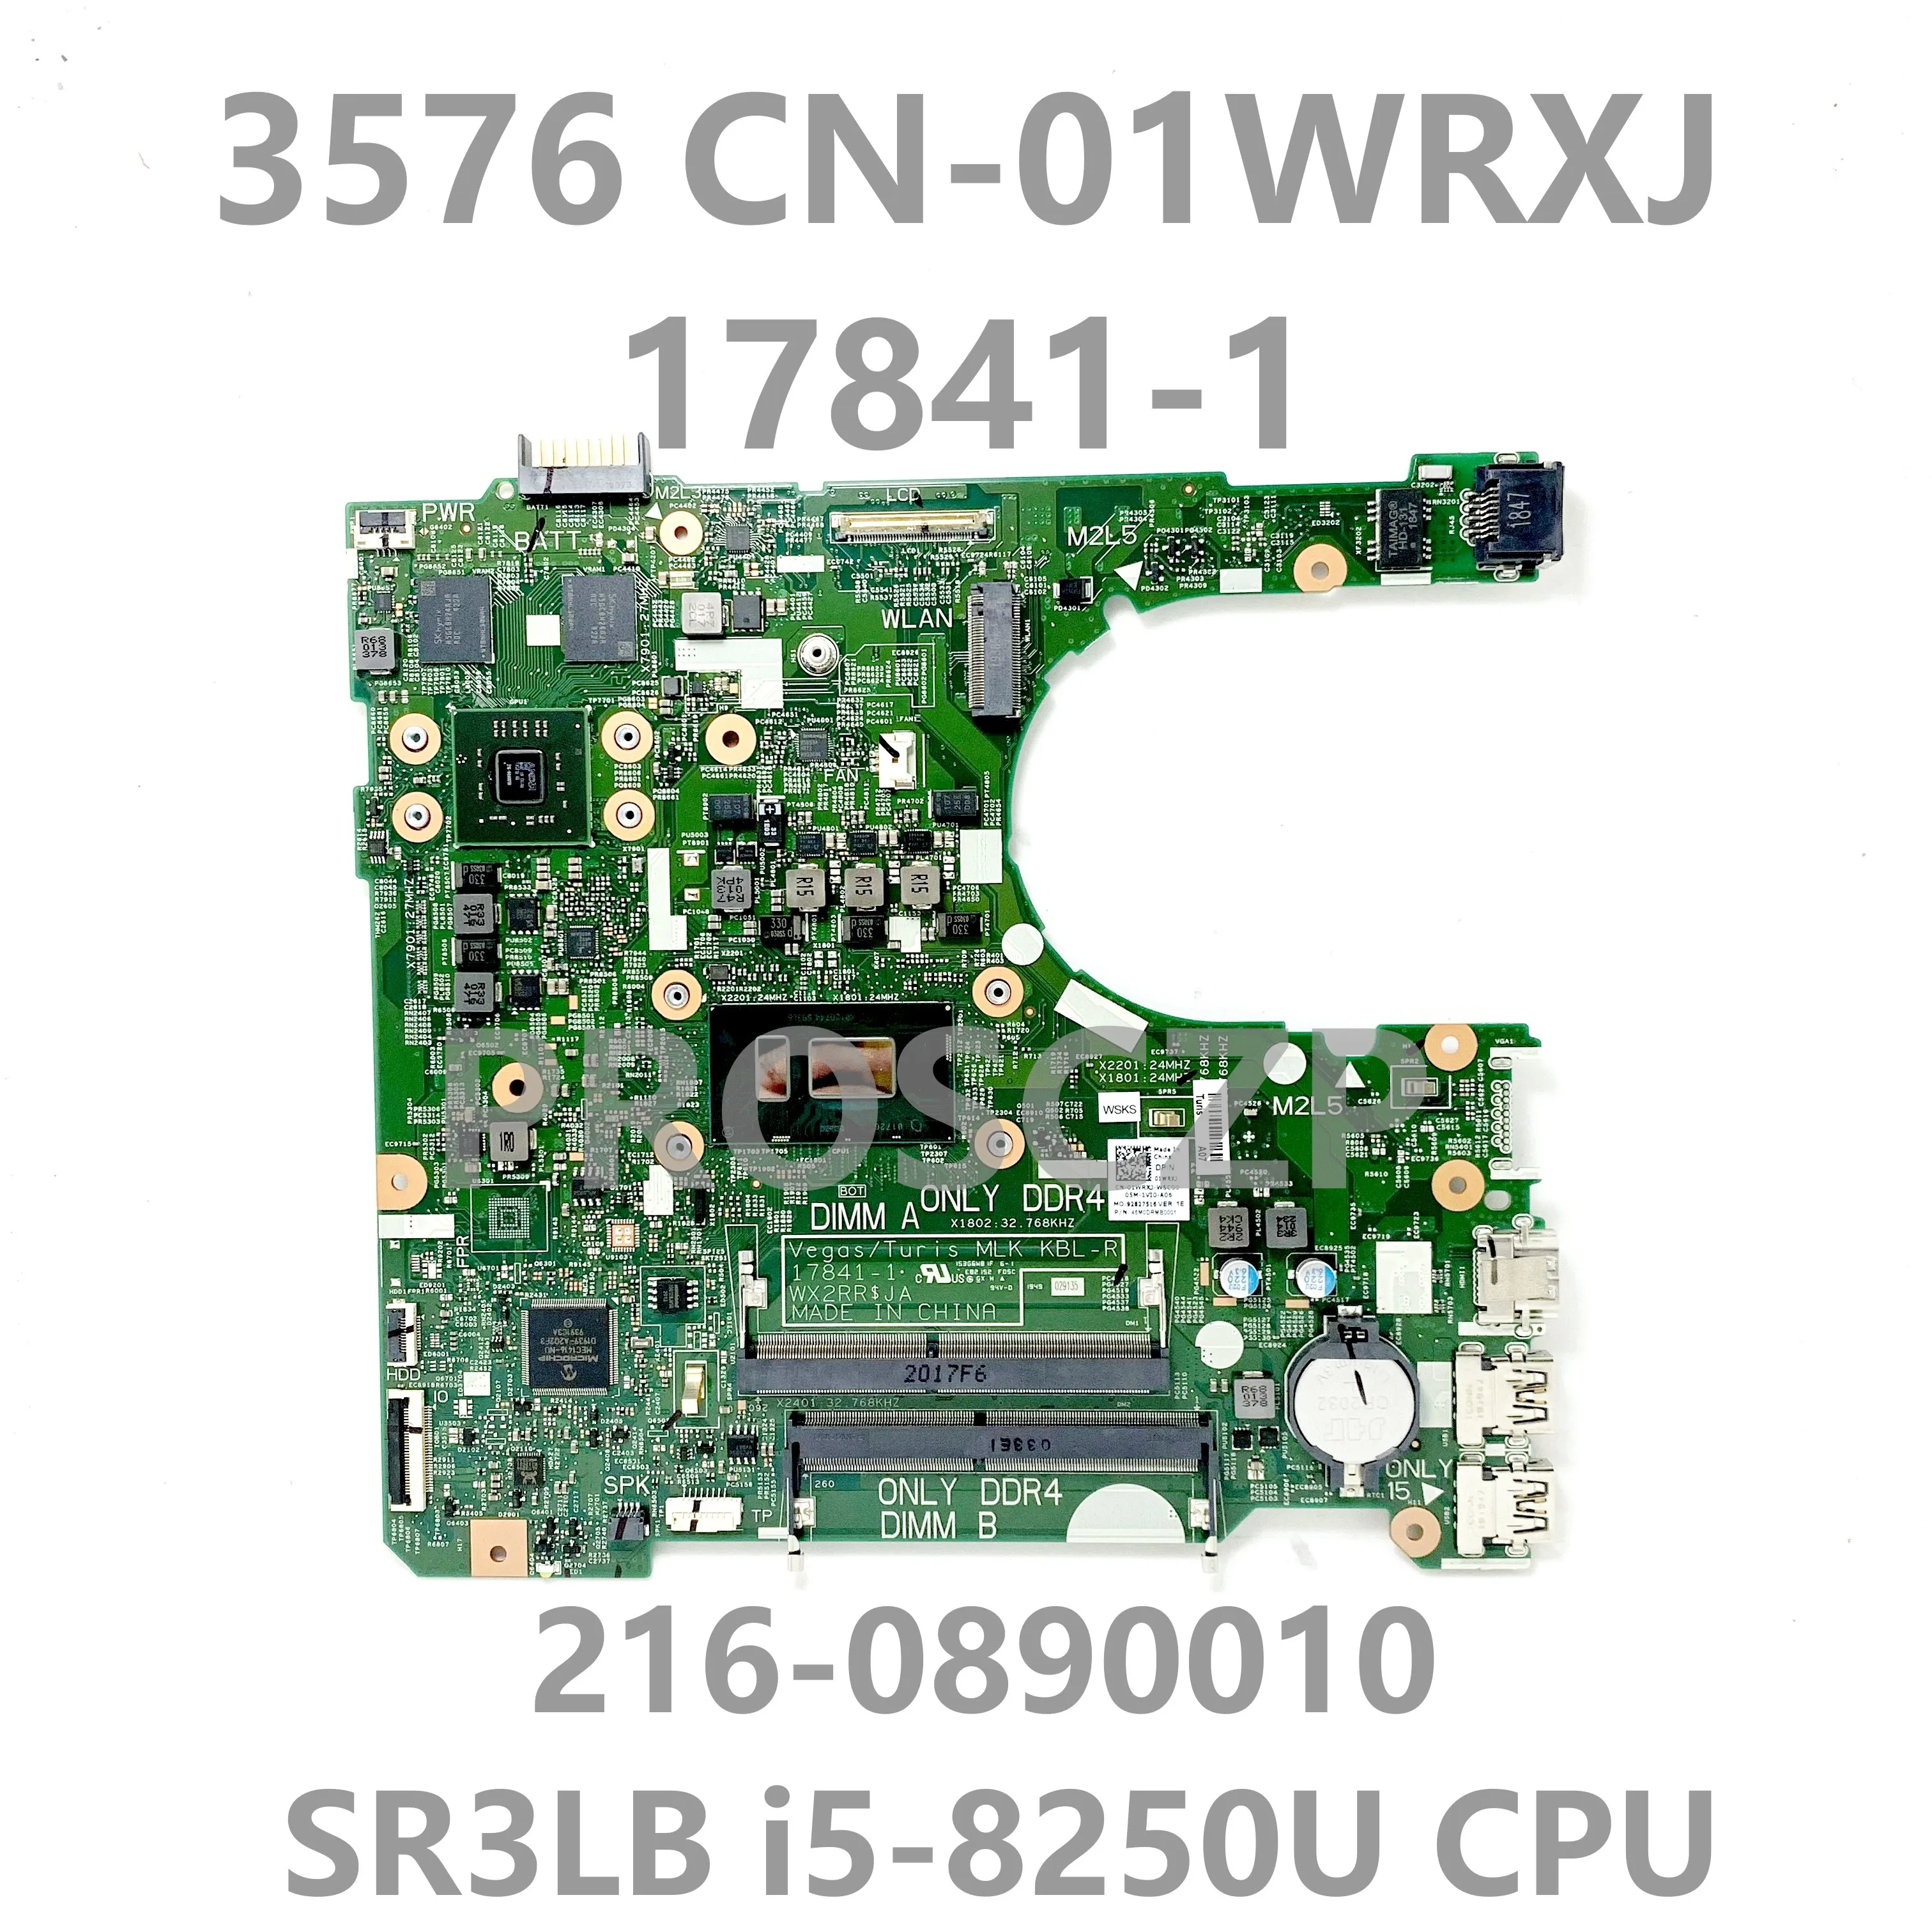 

Mainboard 1WRXJ 01WRXJ CN-01WRXJ 17841-1 For DELL 3576 Laptop Motherboard 216-0890010 With SR3LB i5-8250U CPU 100%Full Tested OK